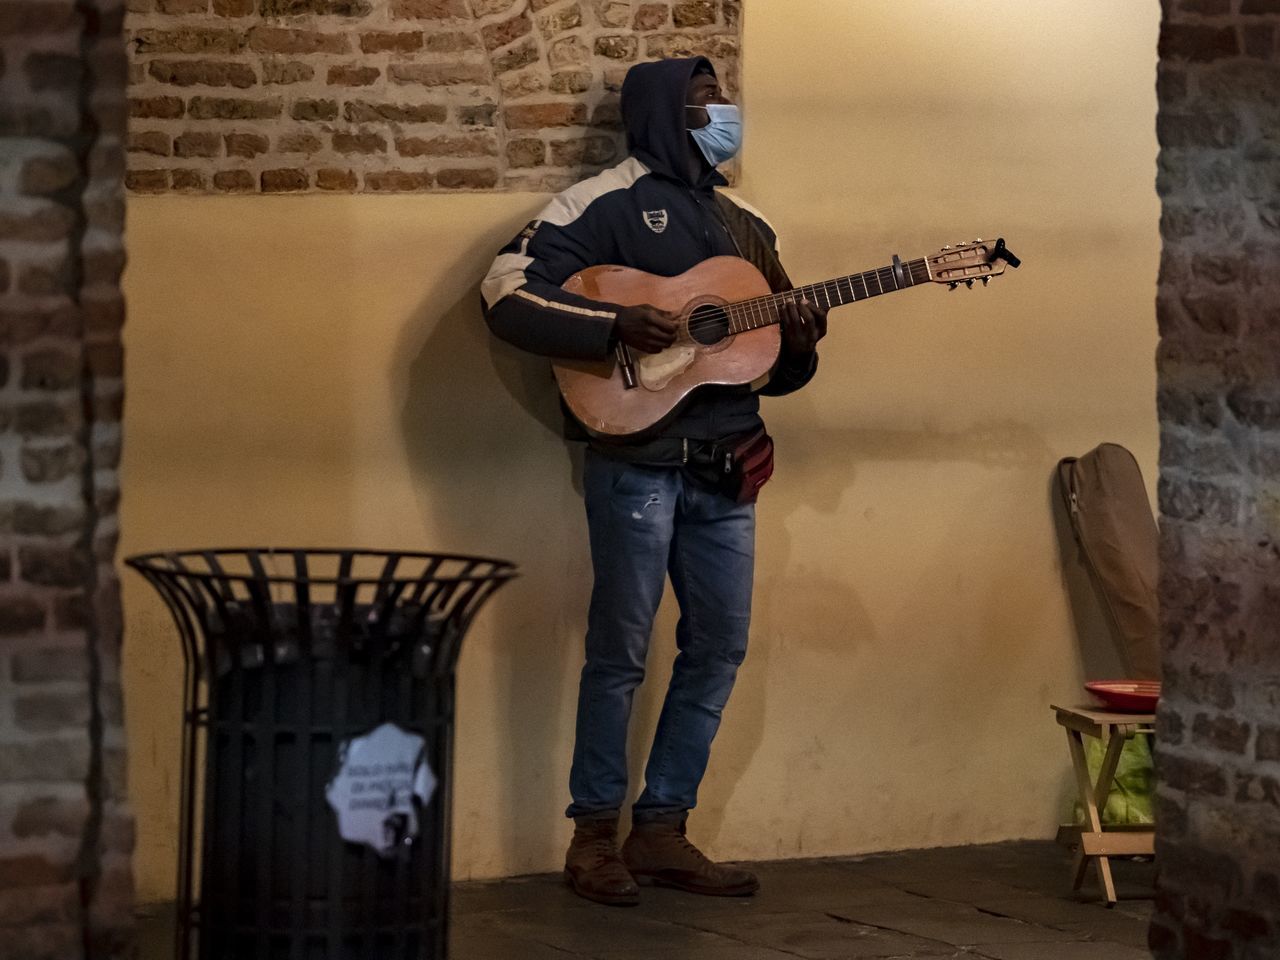 musical instrument, guitar, music, string instrument, musician, brick wall, one person, full length, brick, musical equipment, arts culture and entertainment, adult, wall - building feature, wall, electric guitar, performance, casual clothing, indoors, men, plucking an instrument, standing, skill, young adult, clothing, person, holding, lifestyles